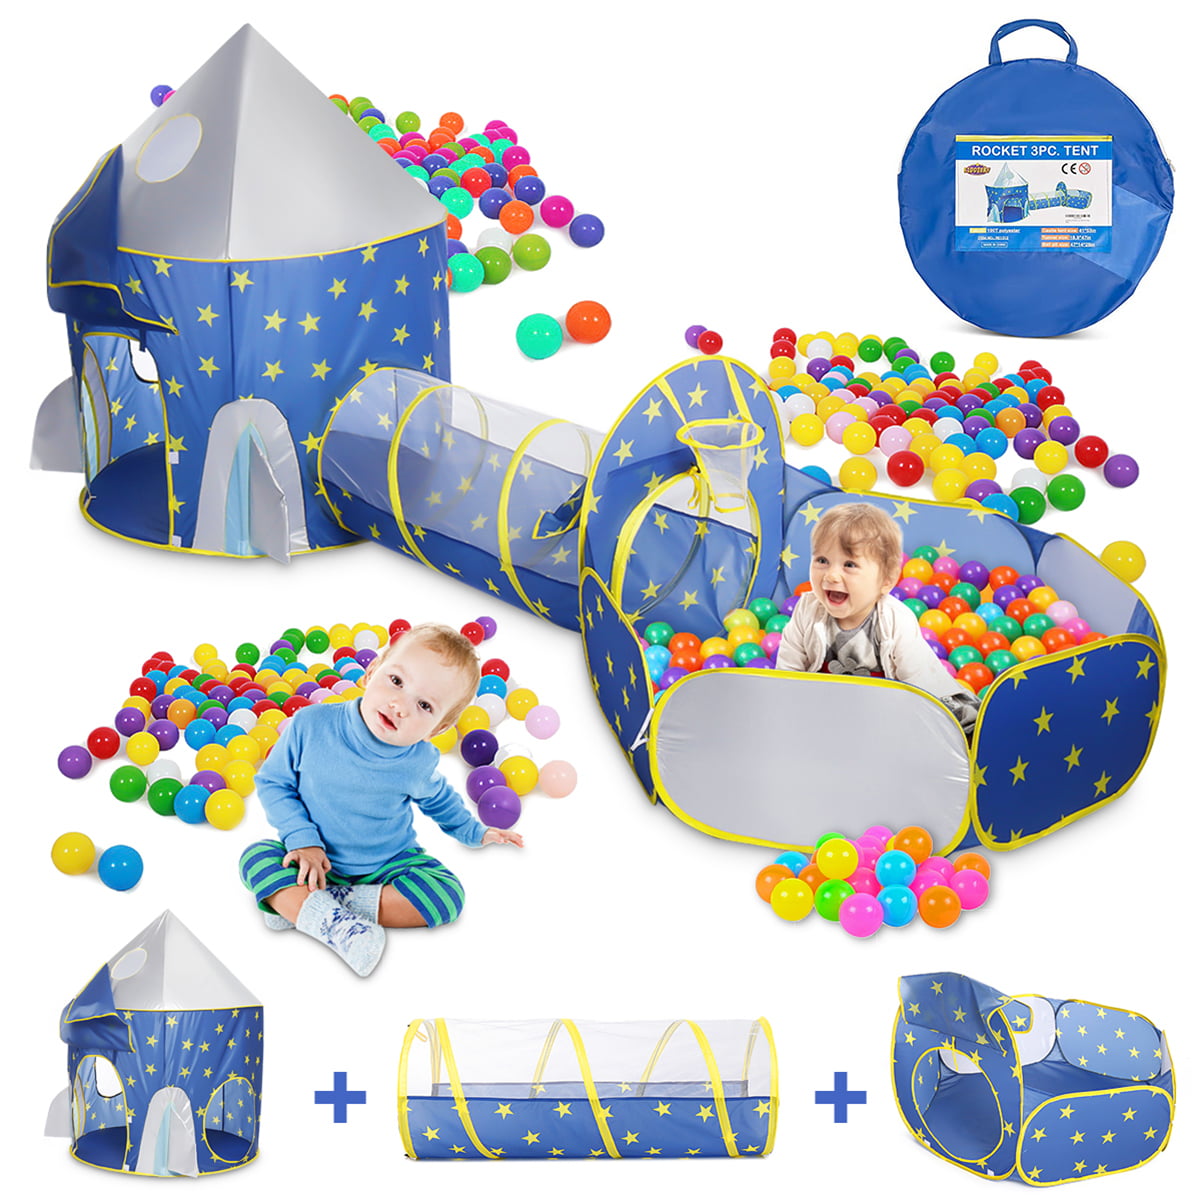 Ideal Gift for Boys and Girls Portable Pop Up Tent Indoor/Outdoor Use Kids Castle Playhouse & Crawl Tunnel & Ball Pit Full Set Wonder Space Children 3 in 1 Play Tent Star Pink 